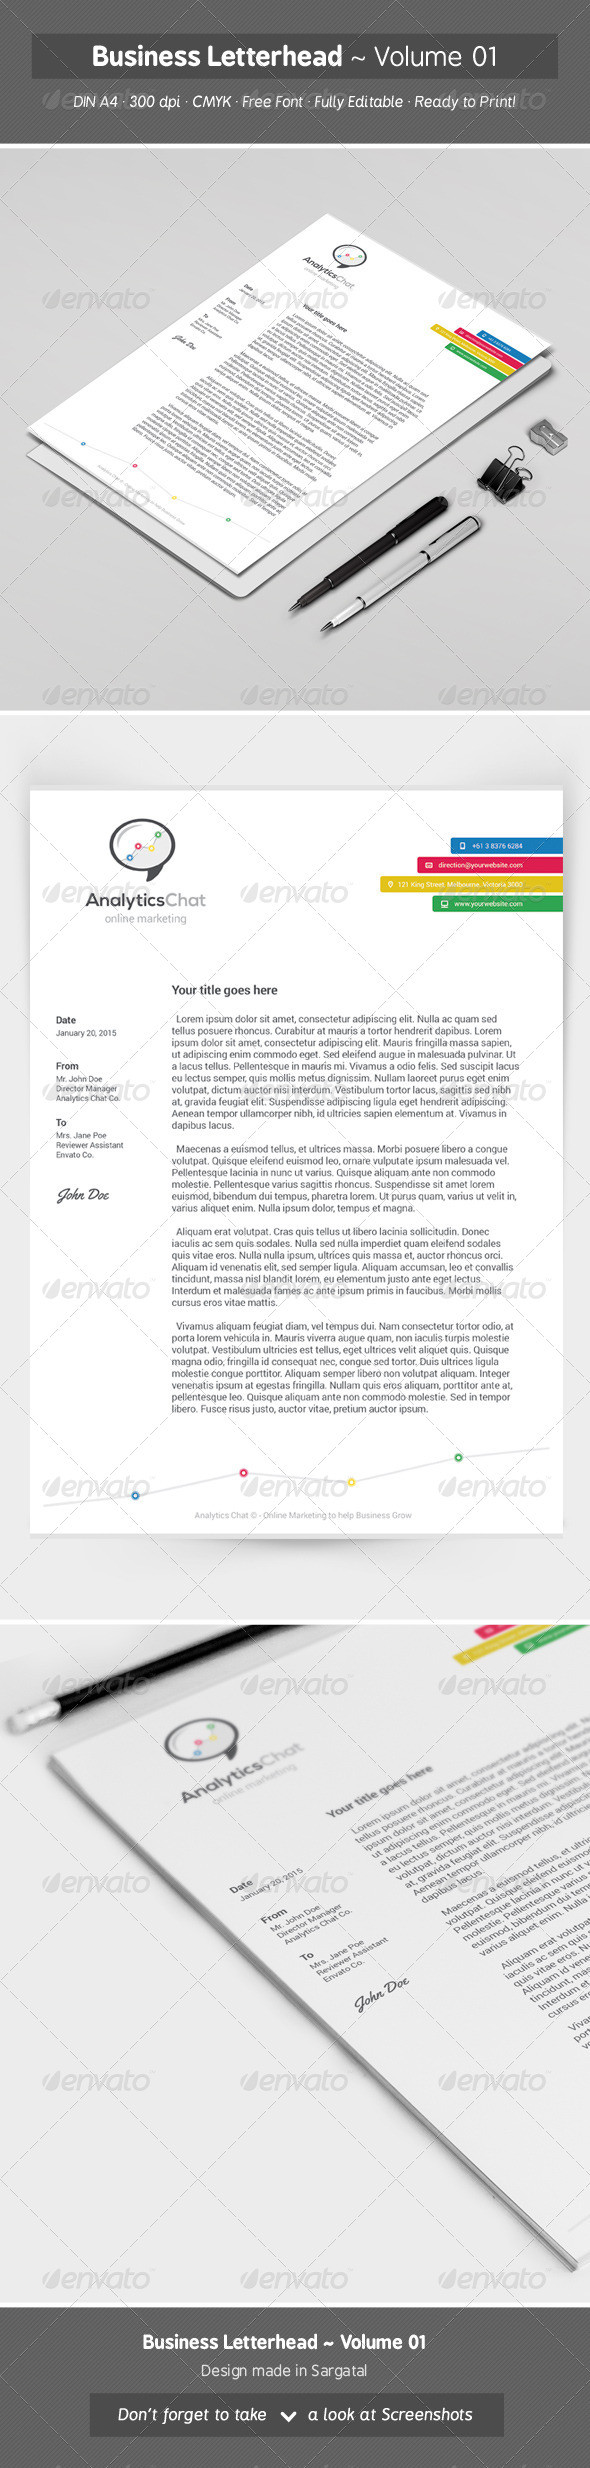 Image preview business letterhead volume 01